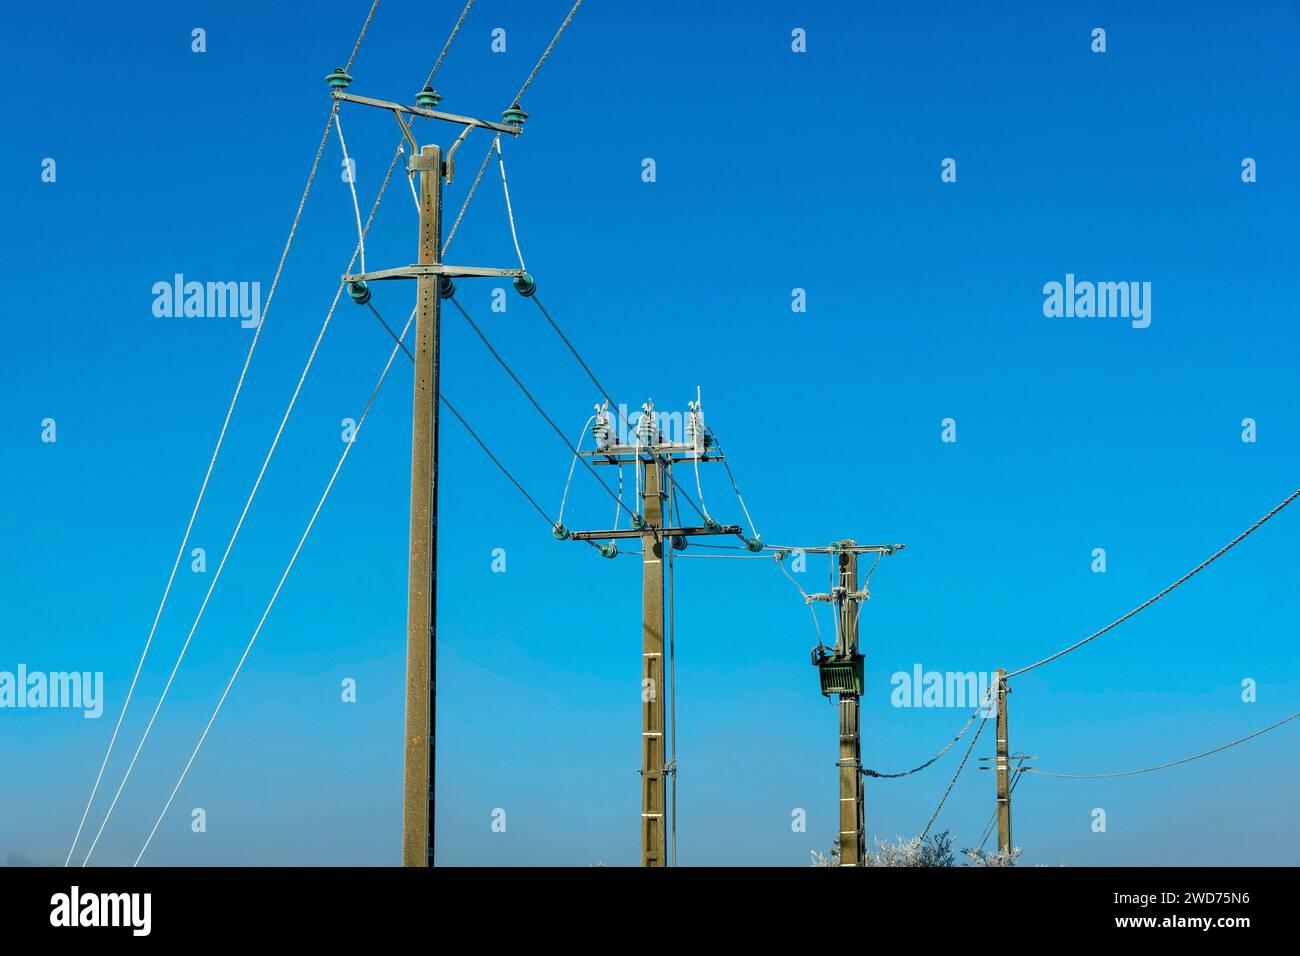 The power lines against a clear blue sky in a rural landscape Stock Photo